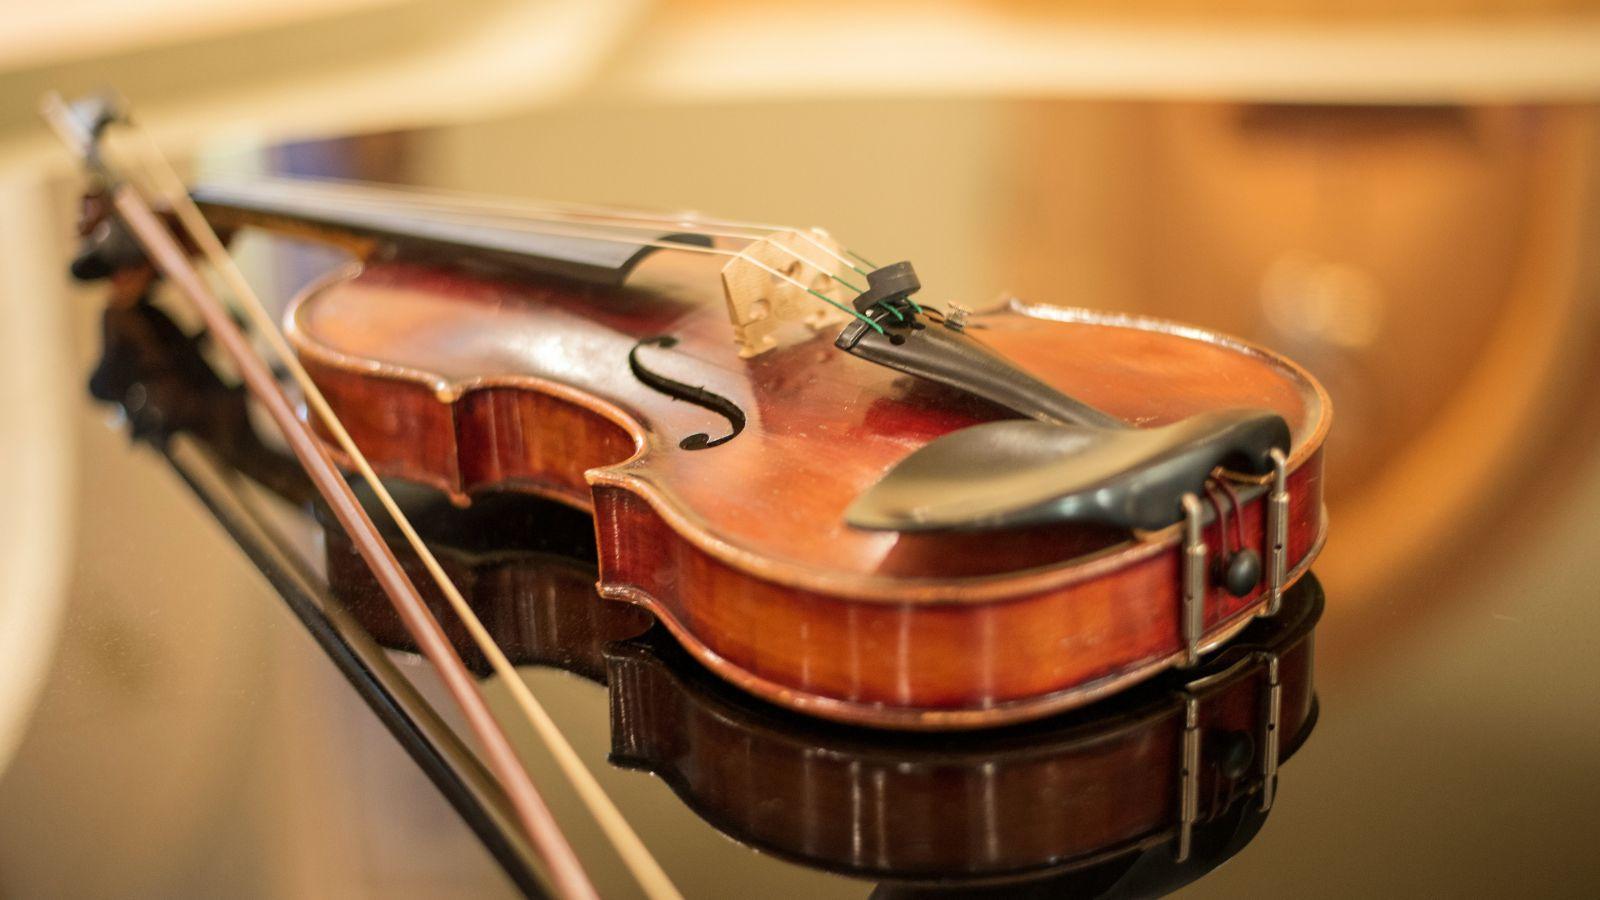 TikTok users shocked to learn how violin strings are made